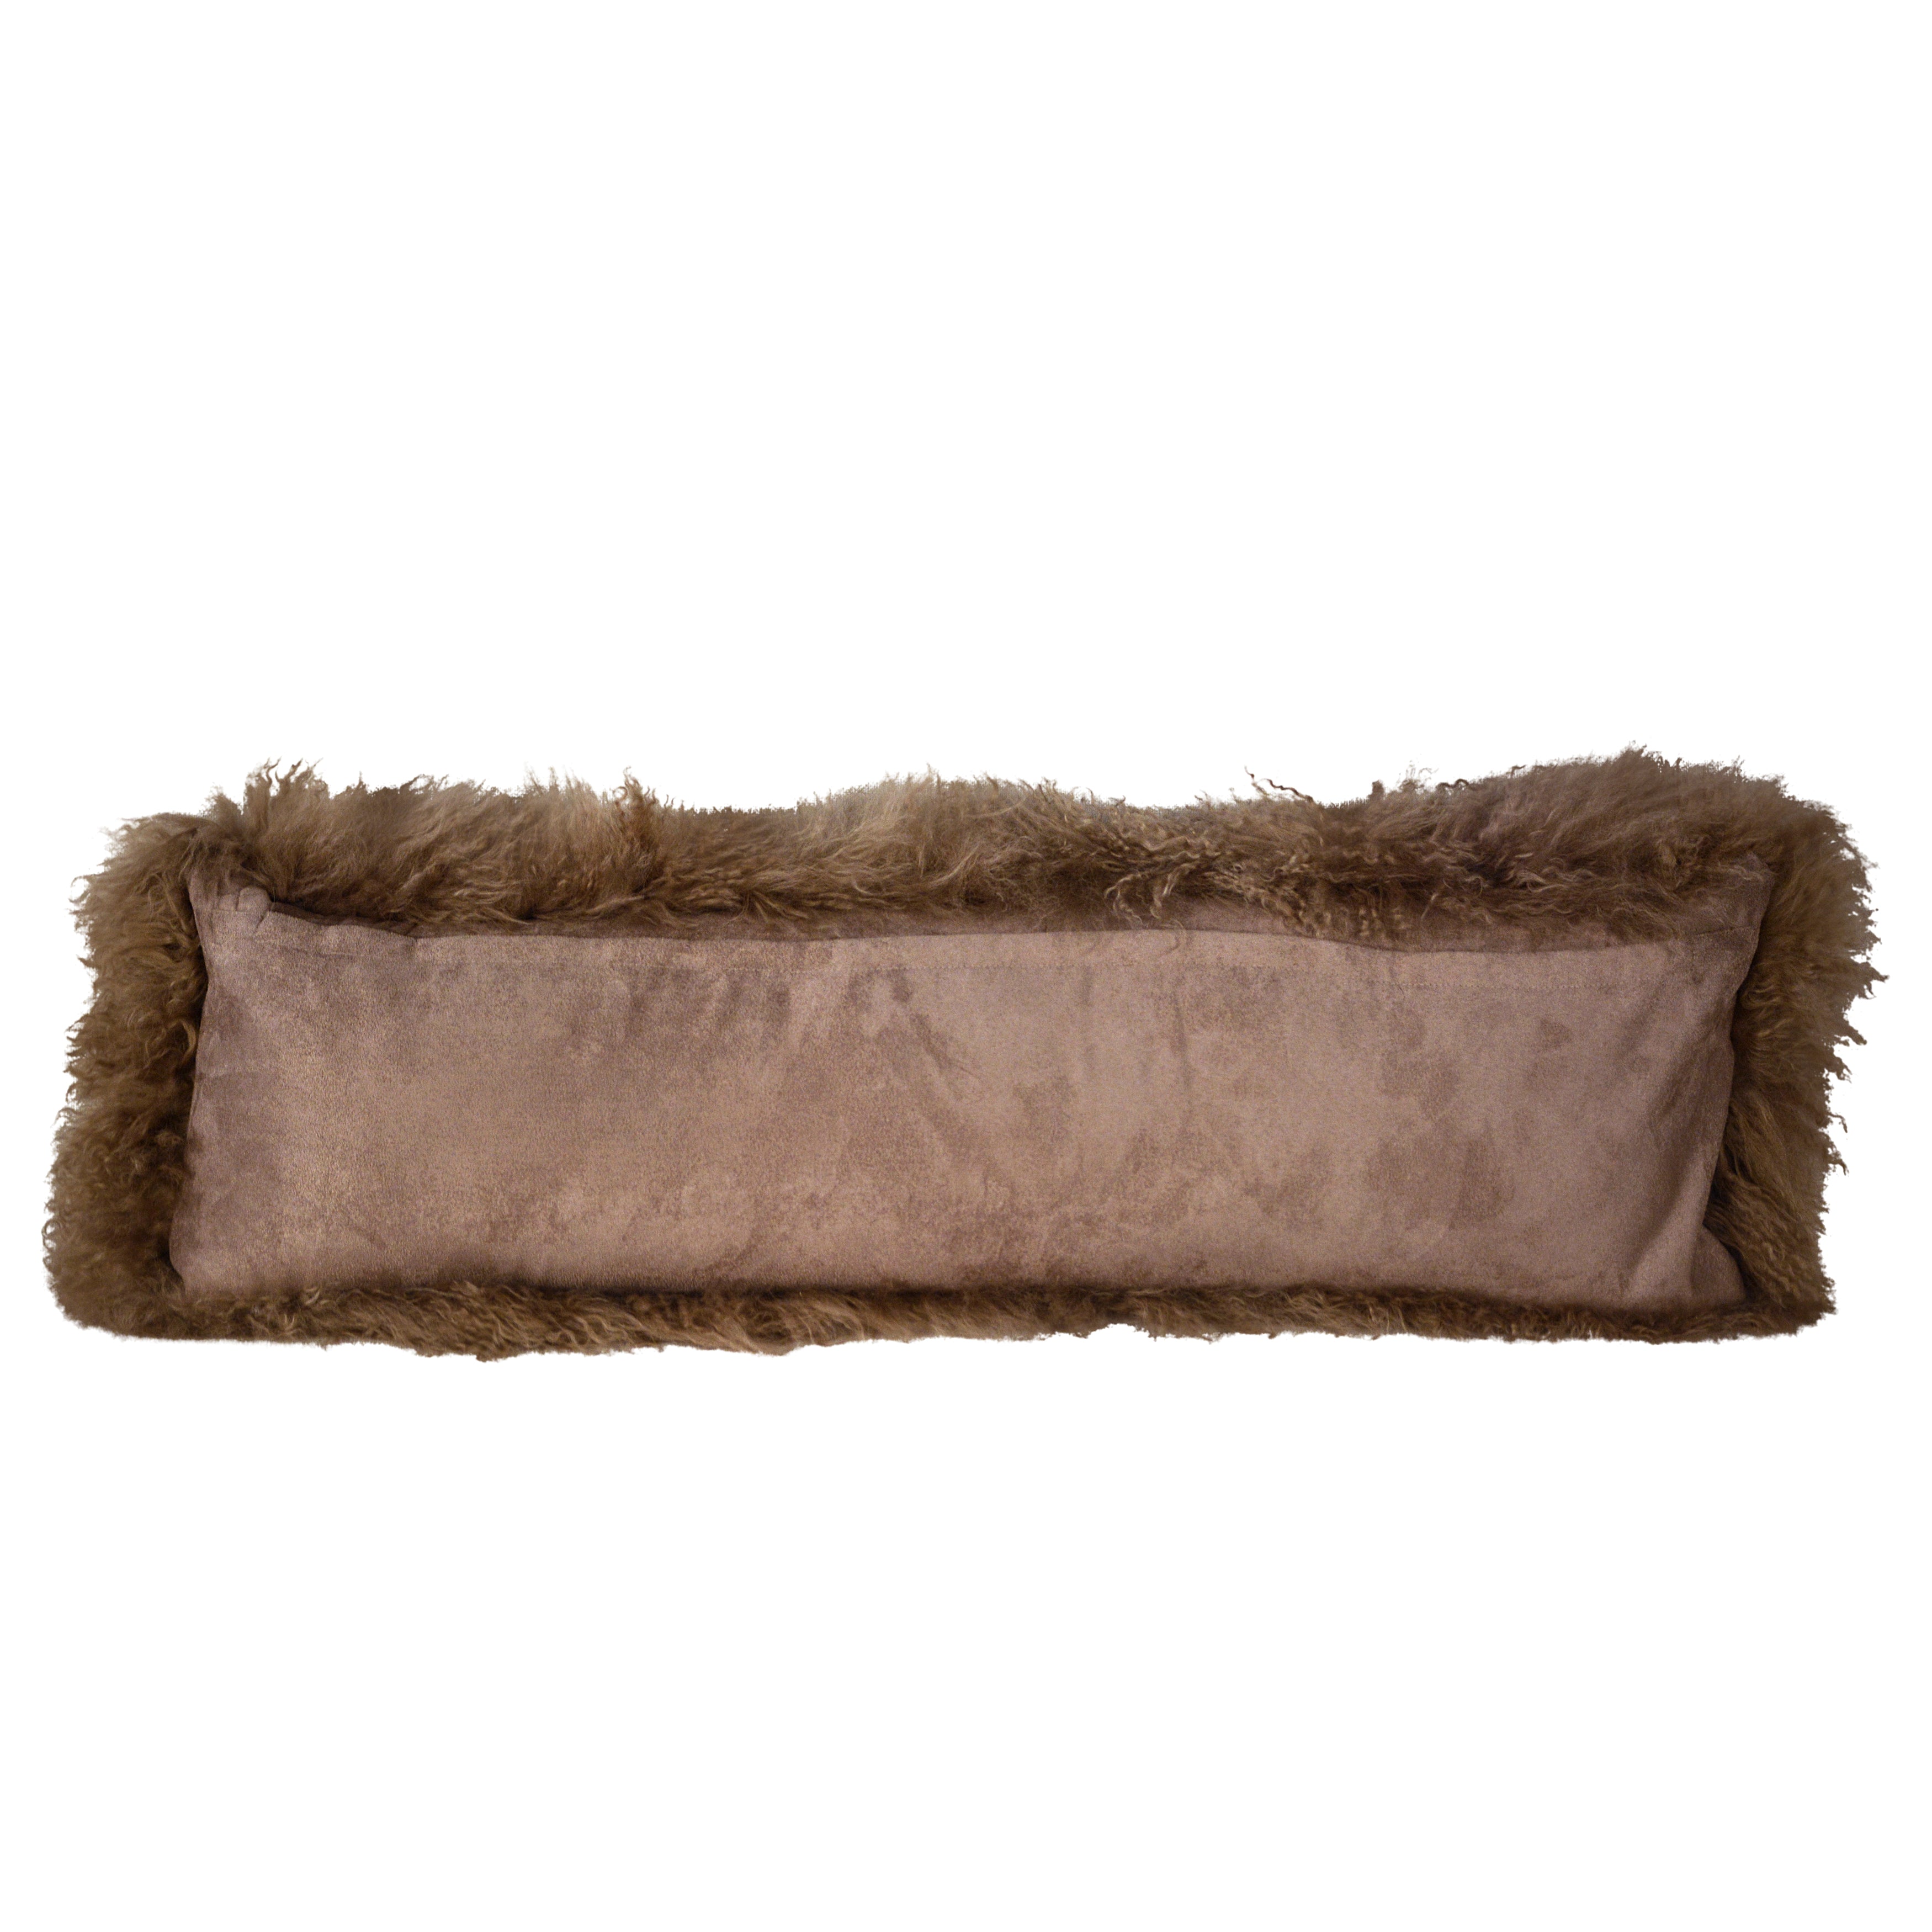 With its unrivaled softness and luxurious lamb fur, this 35x12" pillow will become an instant statement piece. Featuring a lush texture in a beautiful light brown color, completed with a smooth suede back to create the perfect material mix. Pair with other colors and sizes from the same collection.Depth : 6 in Amethyst Home provides interior design, new home construction design consulting, vintage area rugs, and lighting in the Des Moines metro area.